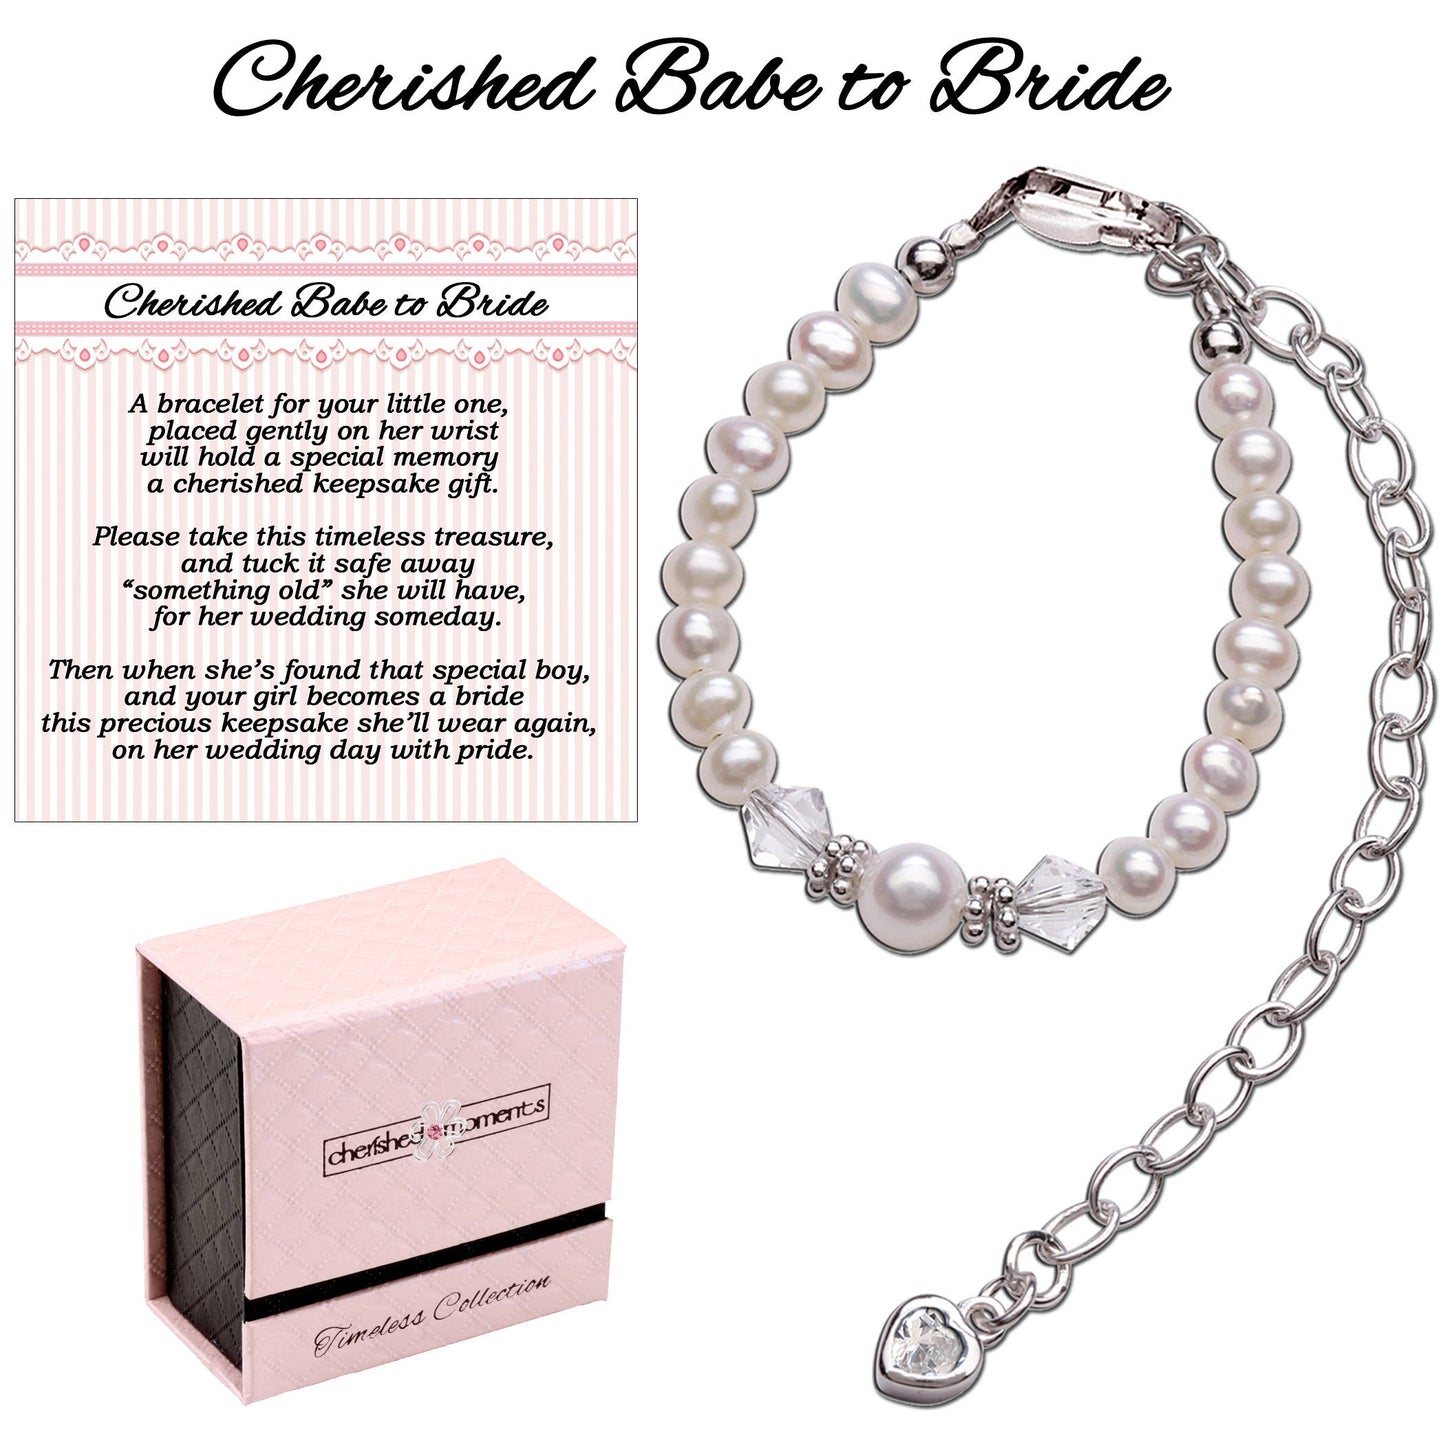 Cherished Baby to Bride Sterling Silver Baby Bracelet Gift